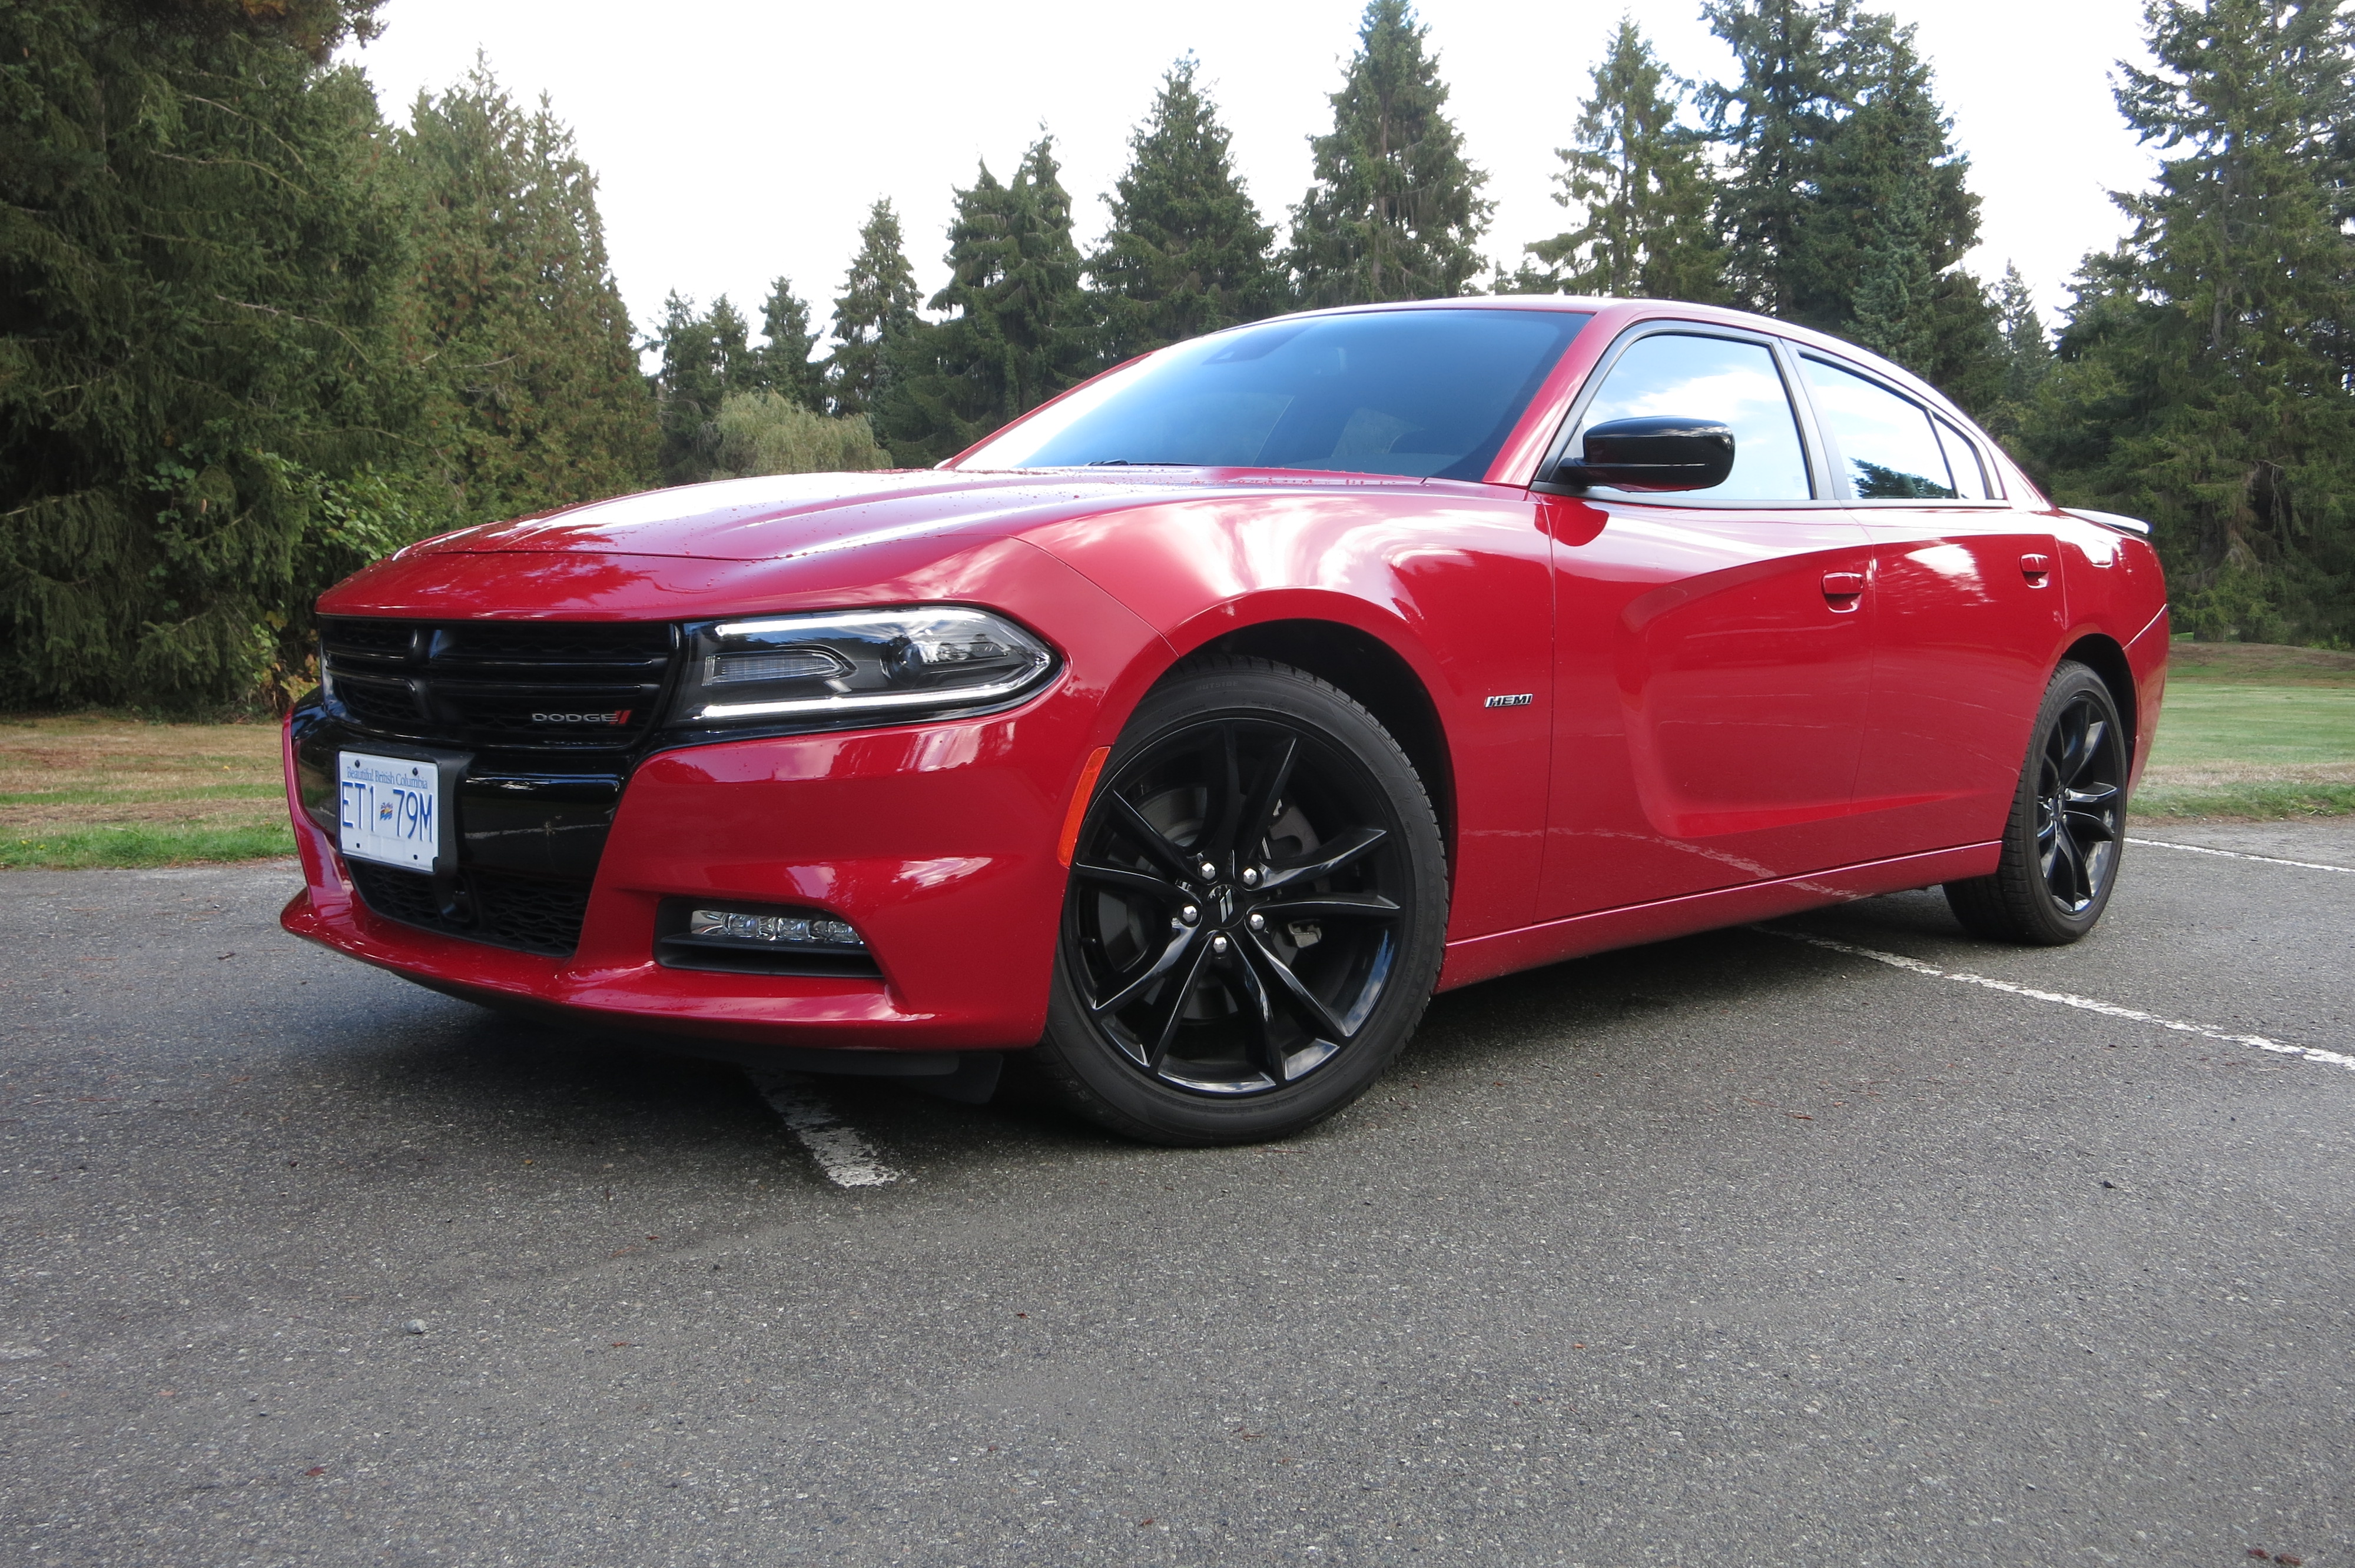 2017 charger rt price